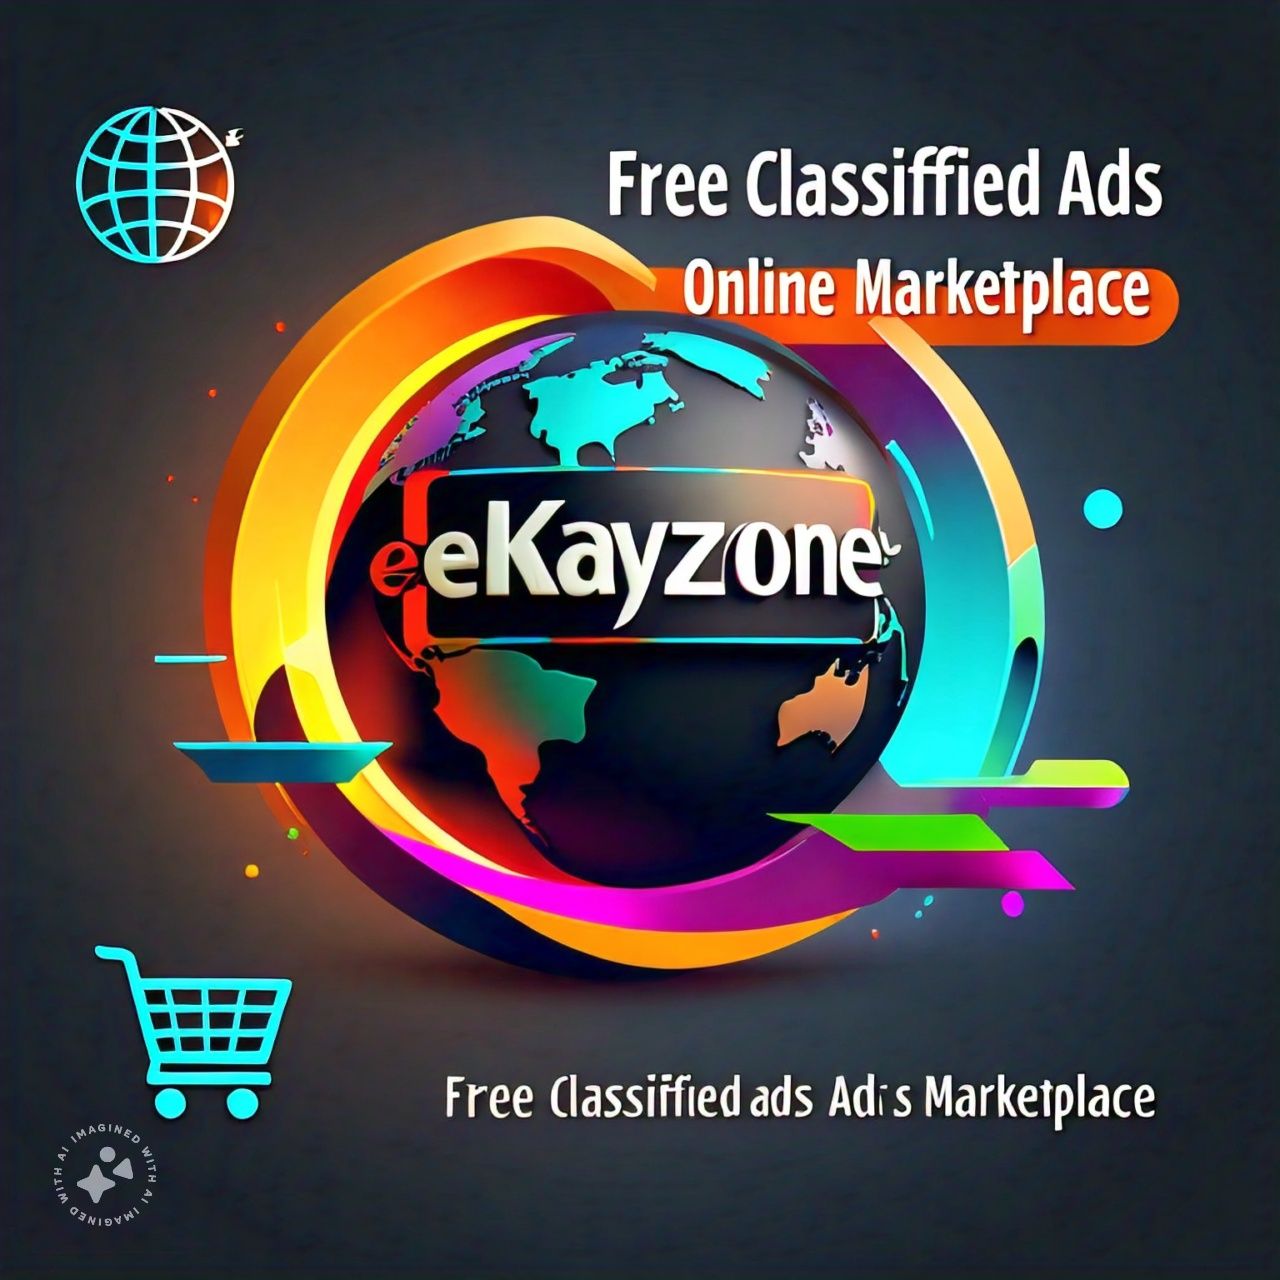 What is eKayzone classified ad online Marketplace?